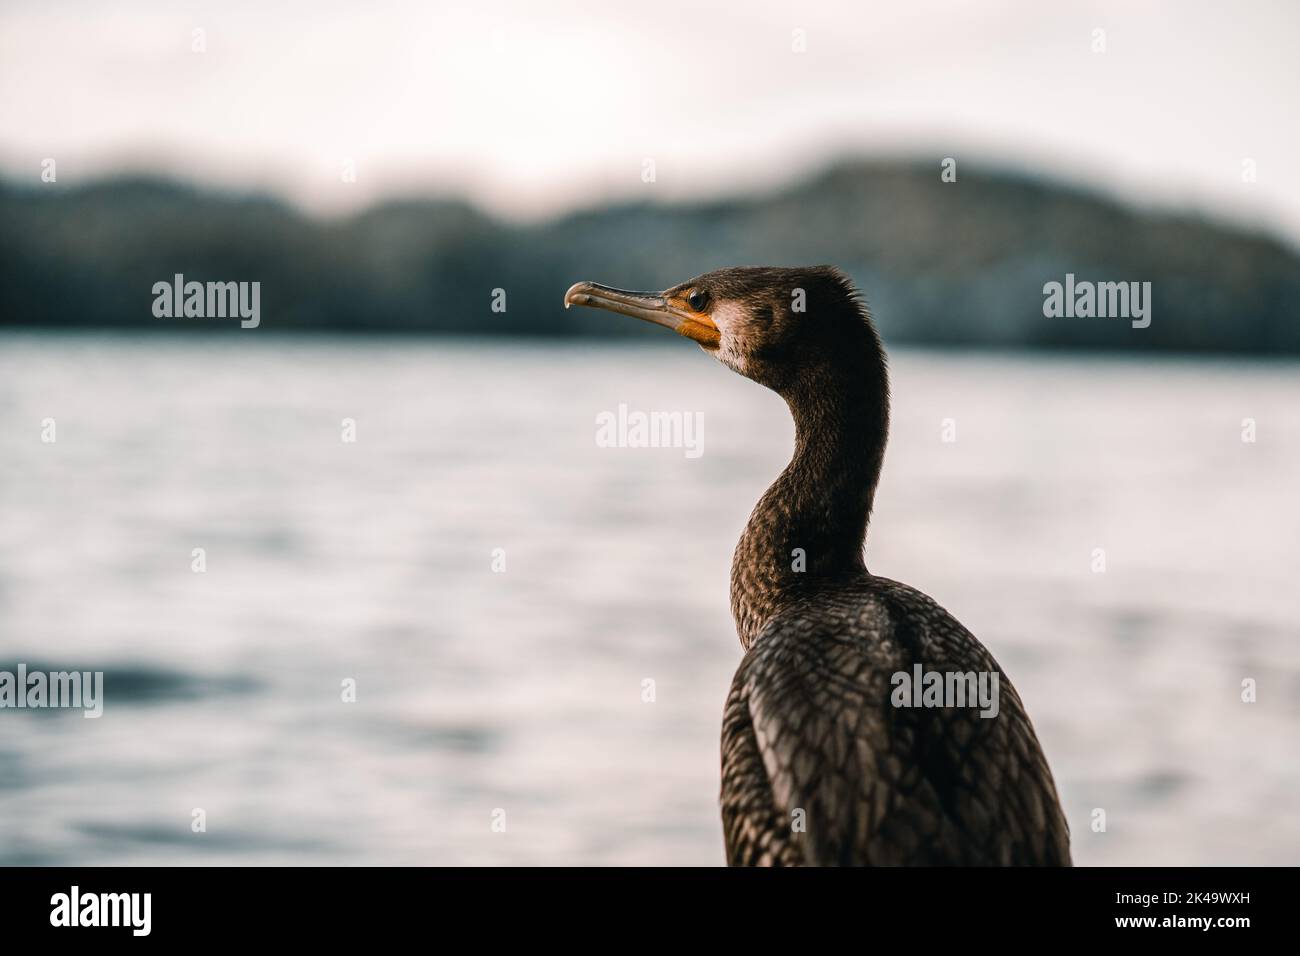 head and neck of a cormorant bird in profile with curved orange beak and gray and brown feathers in the lake, tarawera lake, new zealand Stock Photo